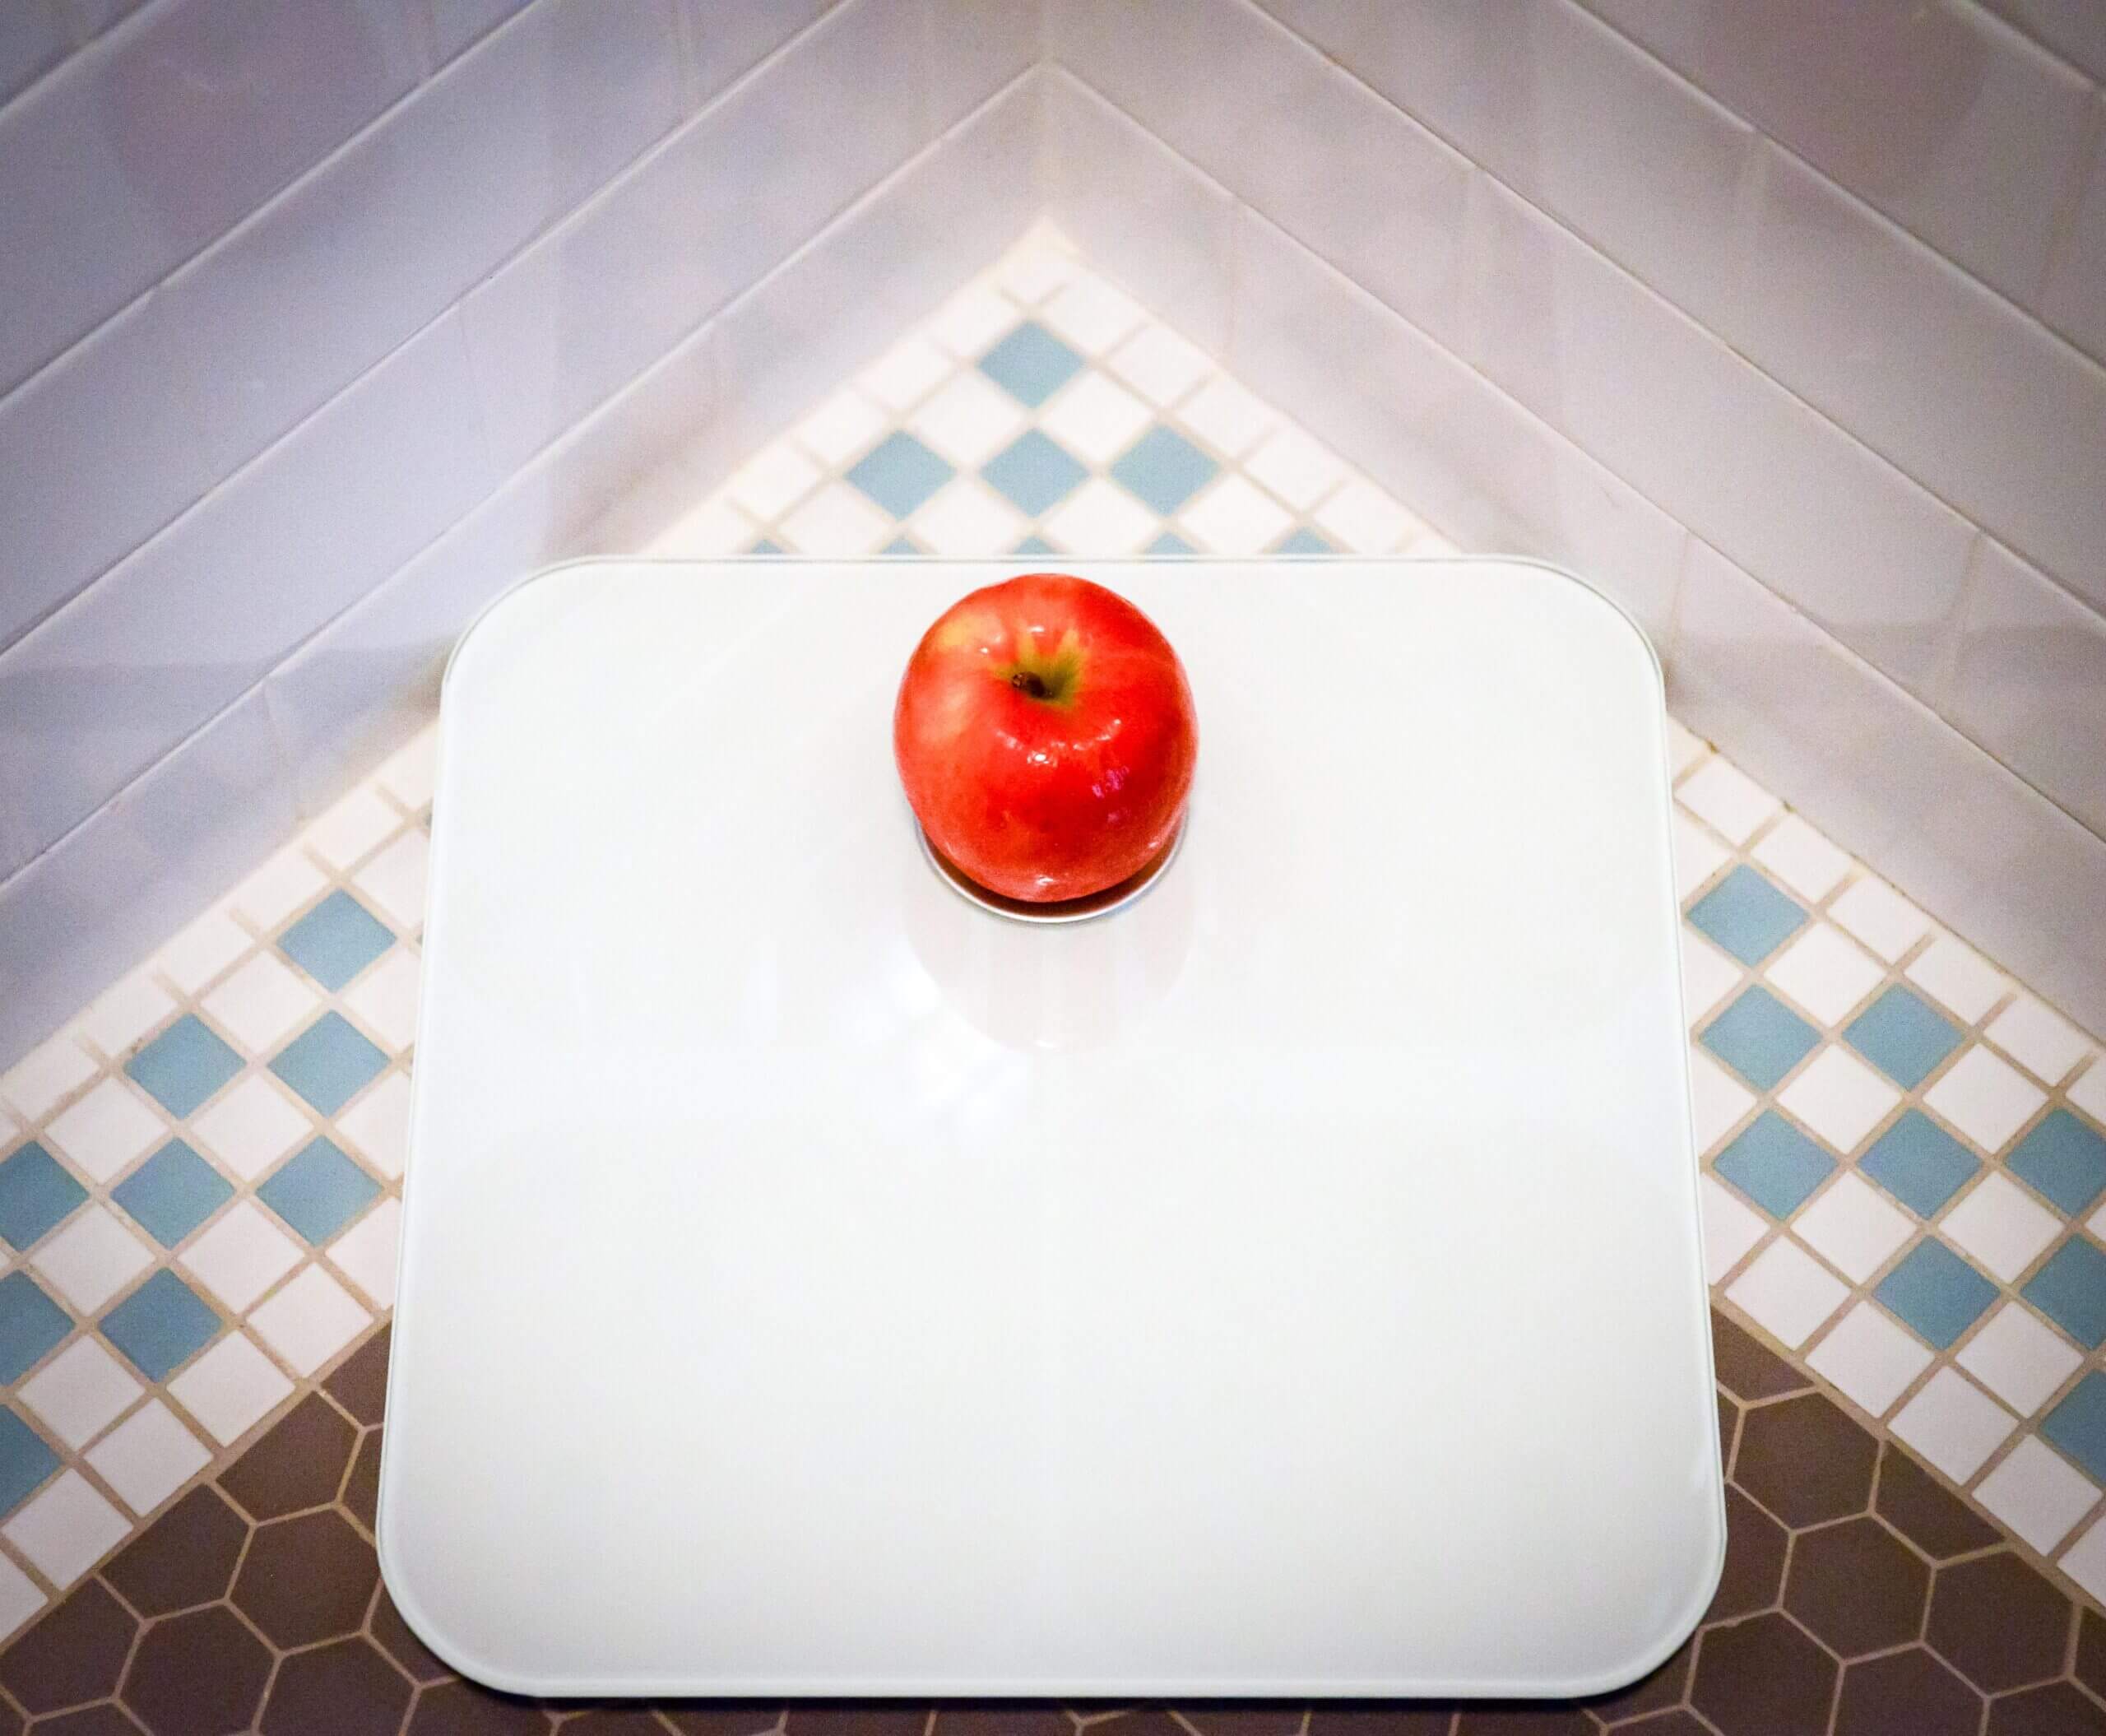 An overhead view of a bathroom scale. The screen of the scale is covered by an apple.